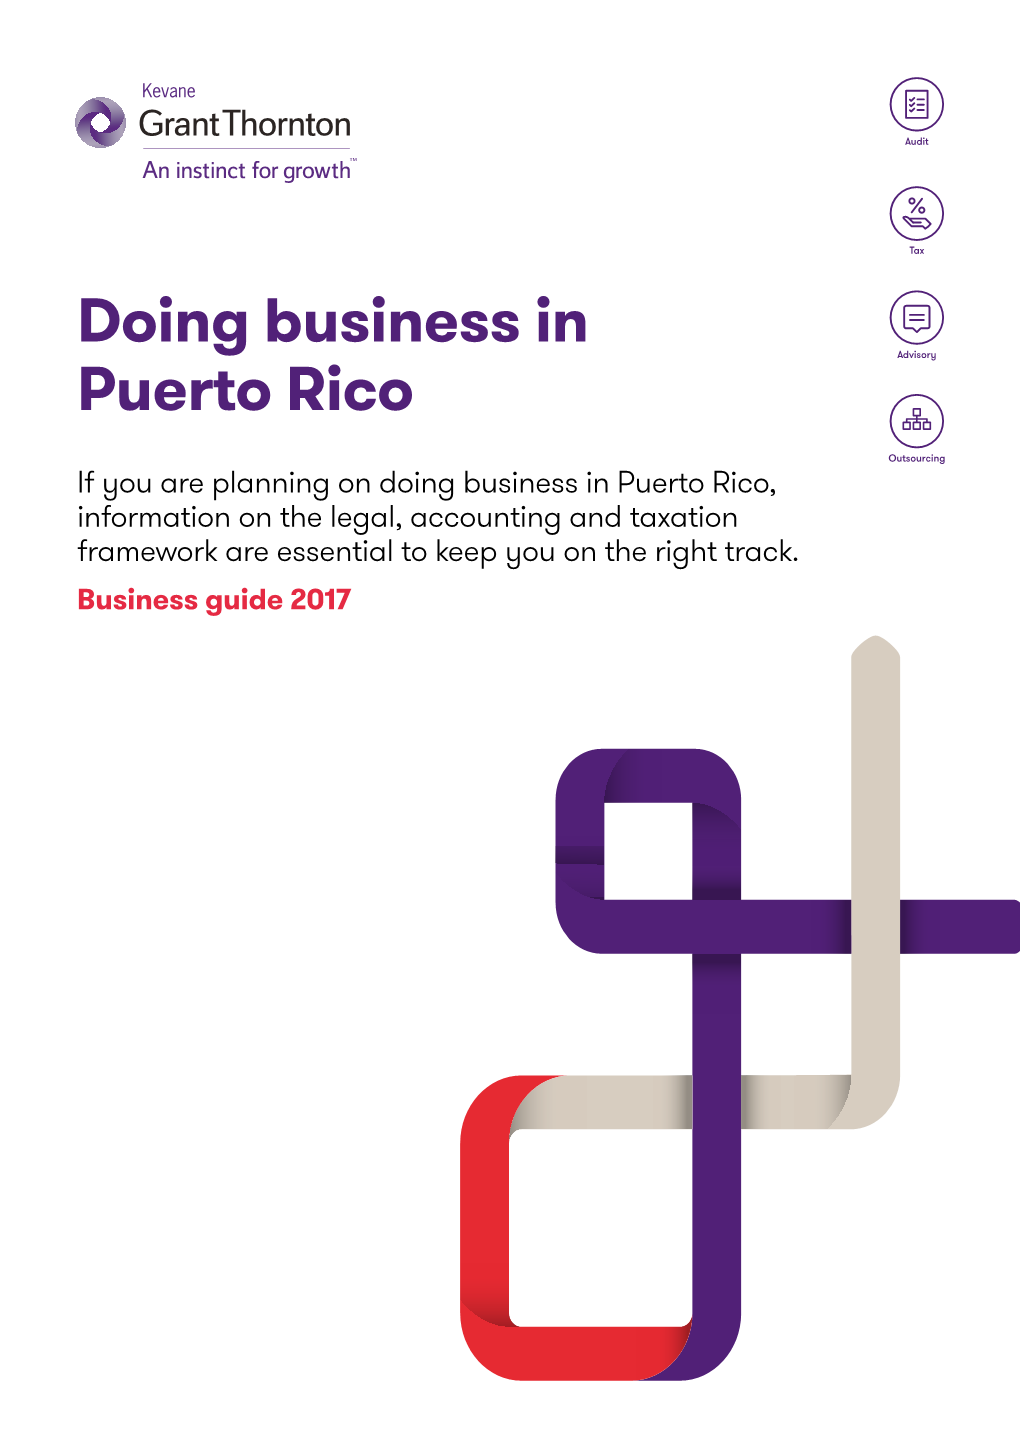 Doing Business in Puerto Rico, Information on the Legal, Accounting and Taxation Framework Are Essential to Keep You on the Right Track